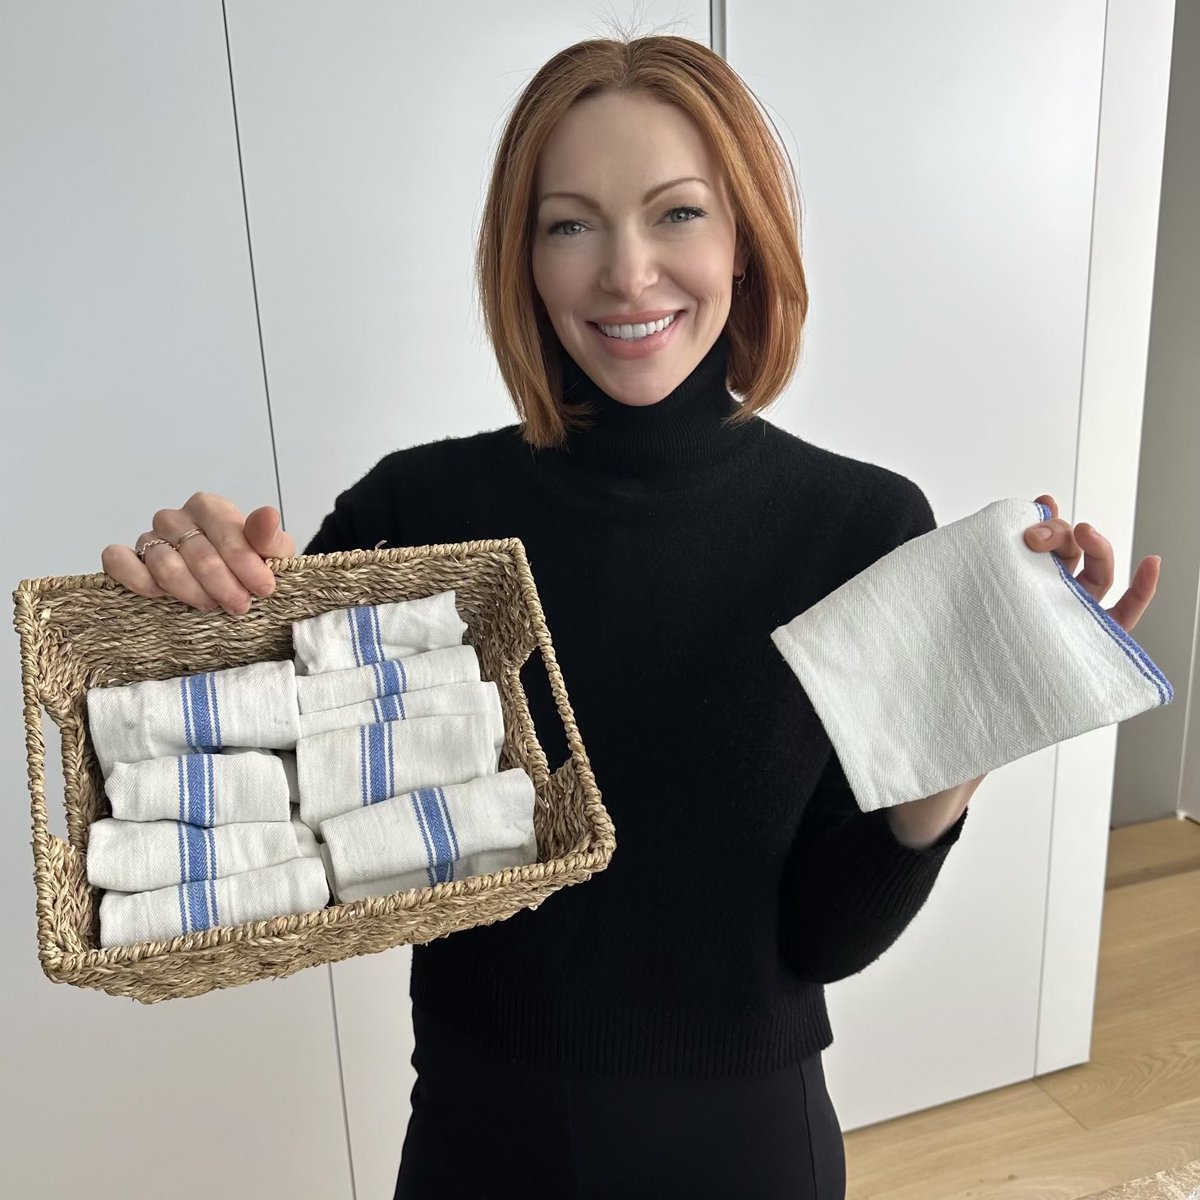 Do you #GetYourPrepOn with any environmentally friendly hacks? @LauraPrepon replaced paper towels at home with washable, reusable cotton towels. Happy #EarthMonth! #PrepOn